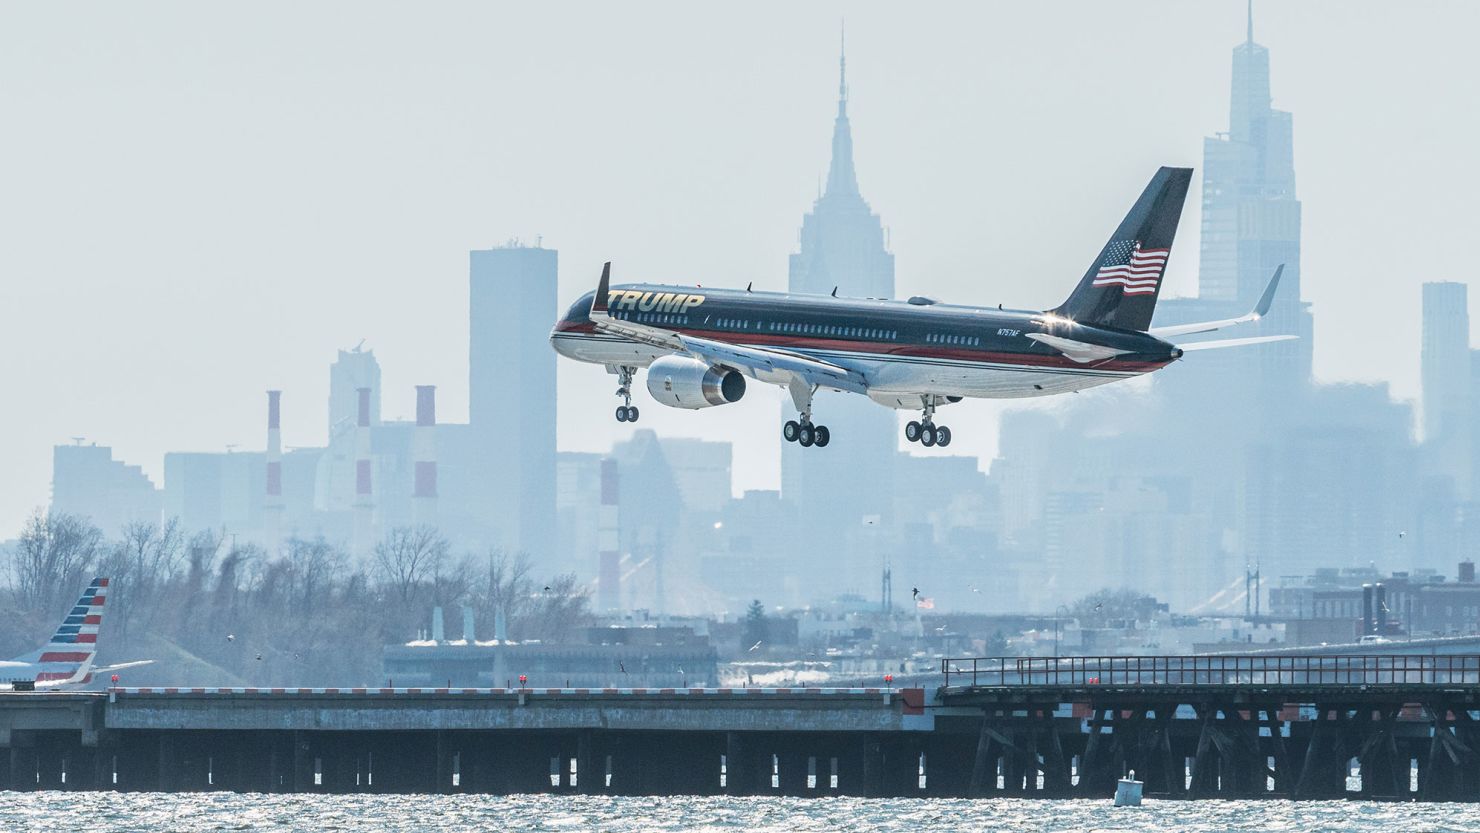 The plane carrying former president Donald Trump lands at LaGuardia airport in New York, April 3, 2023. He will face a judge tomorrow, on charges in a still sealed indictment.